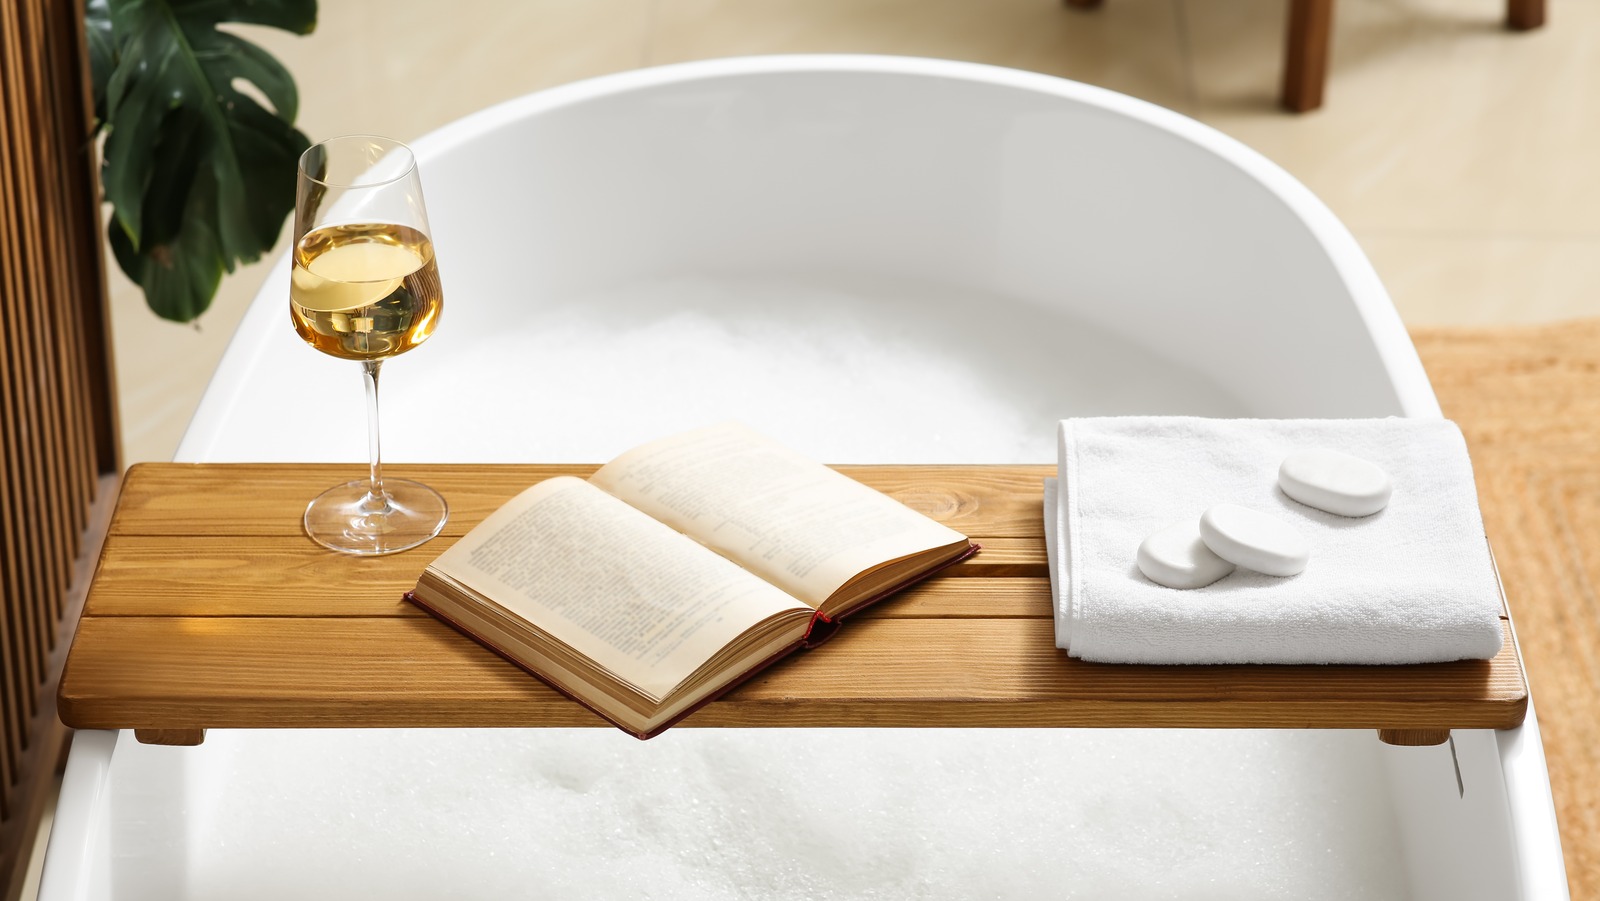 https://www.housedigest.com/img/gallery/25-bath-trays-that-will-make-your-space-feel-like-a-spa/l-intro-1669740335.jpg